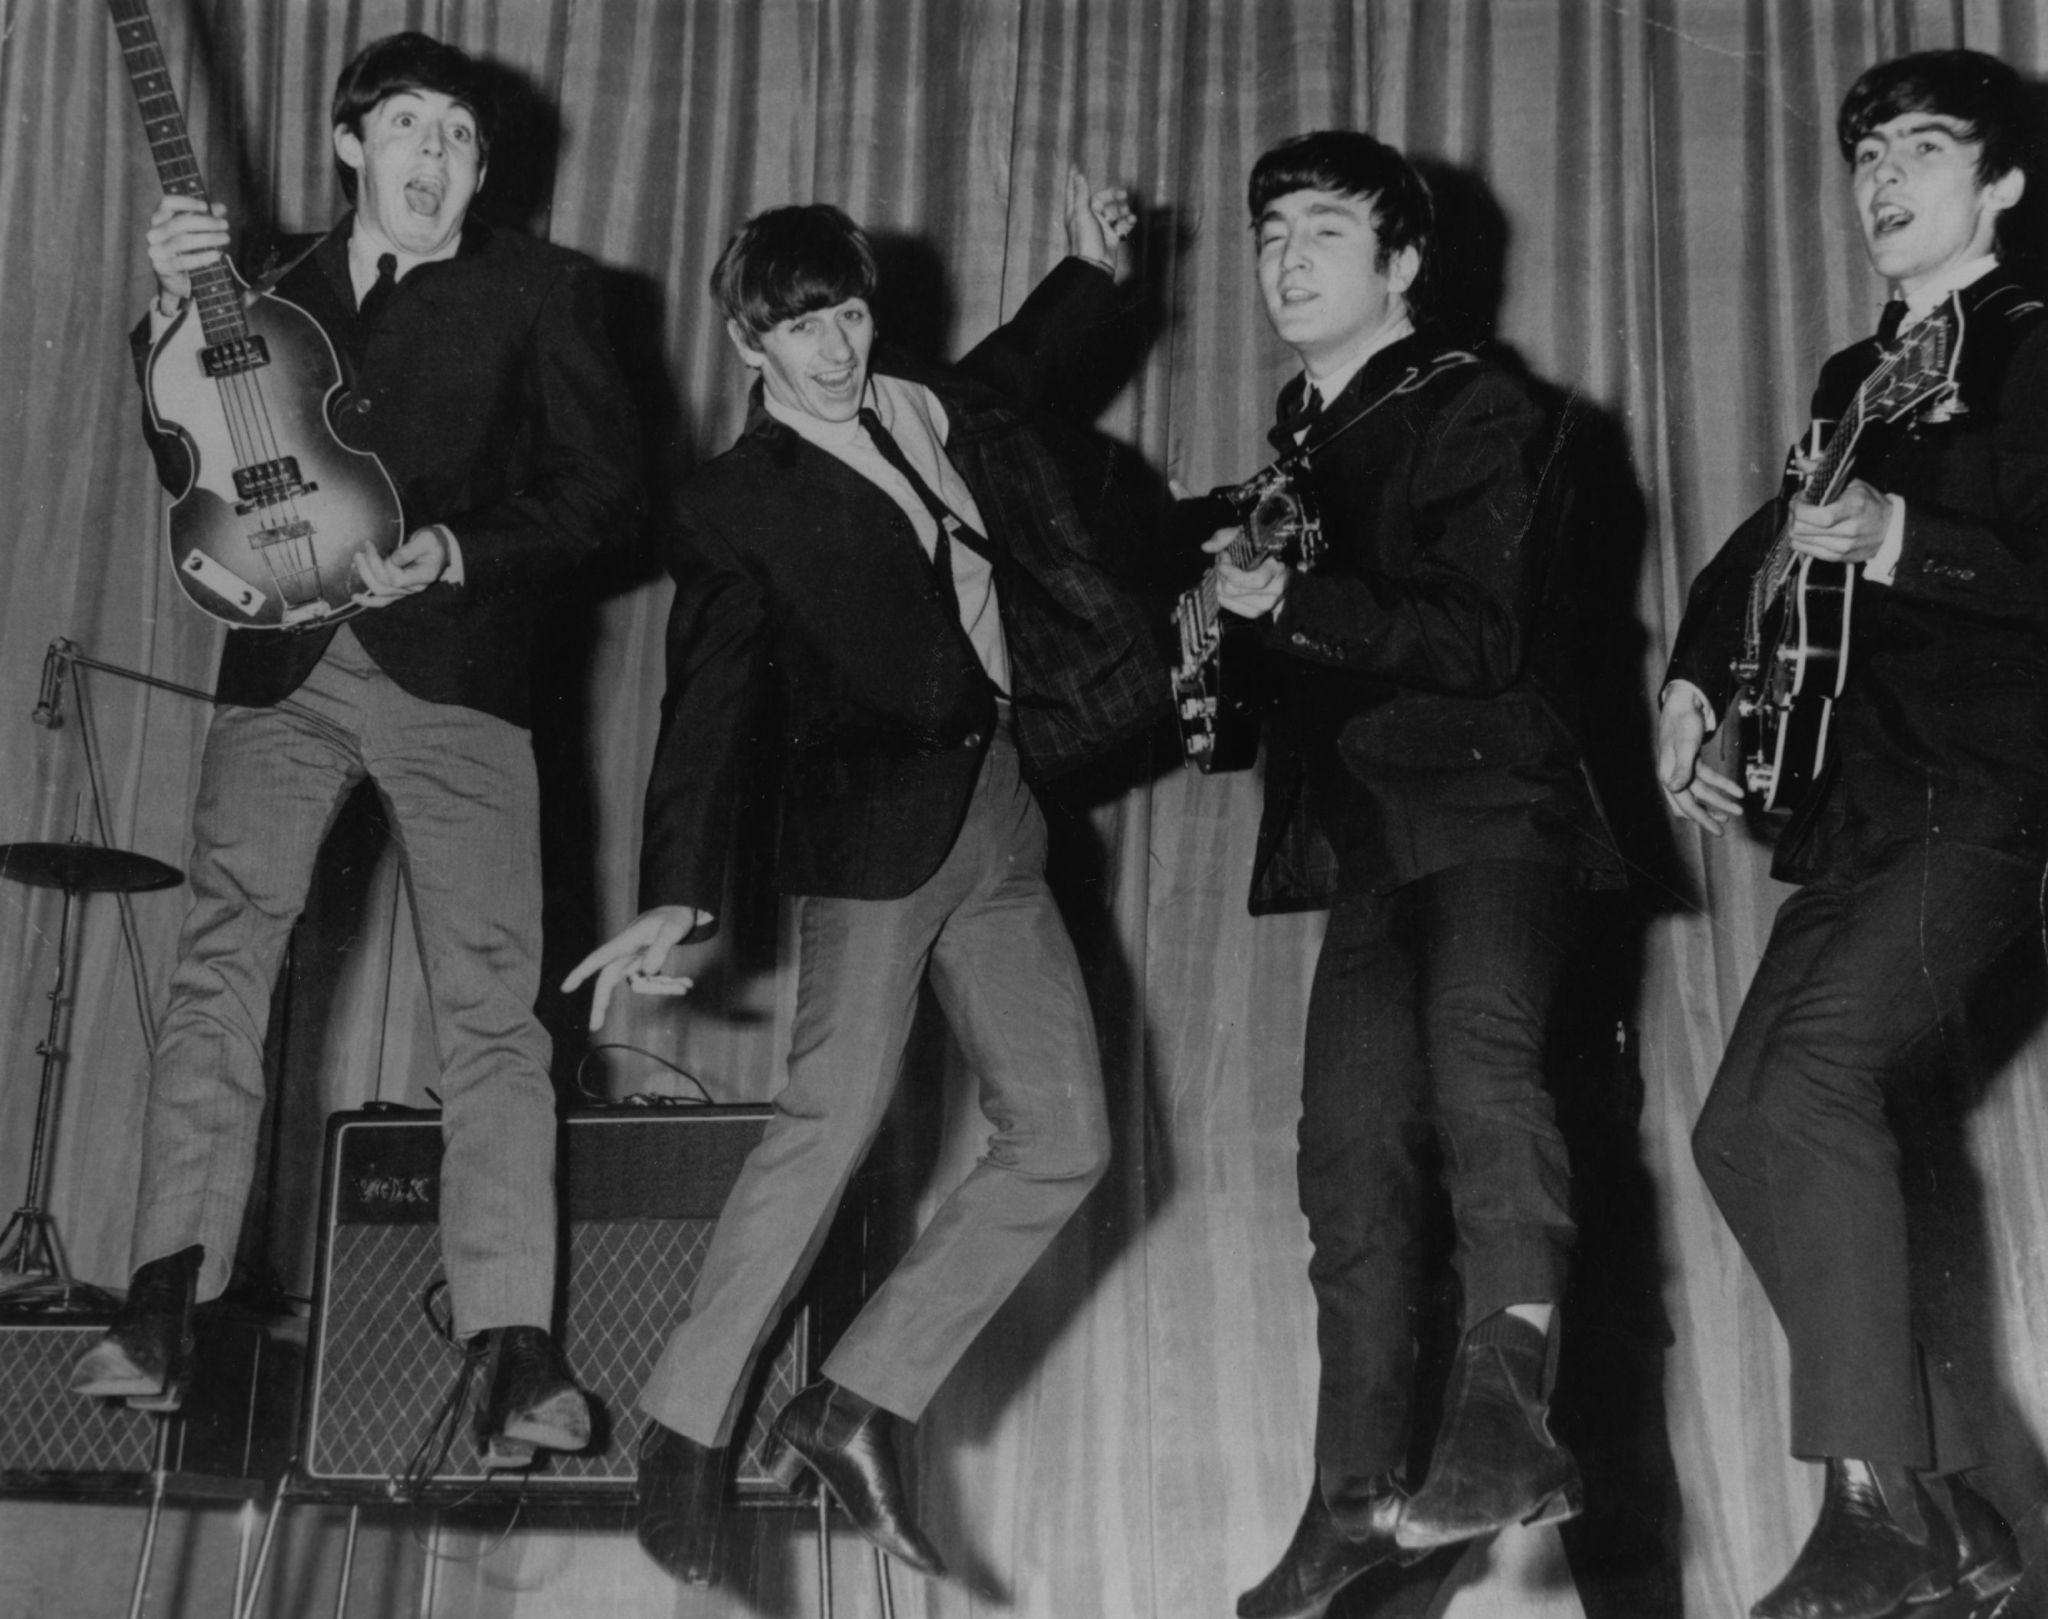 The Beatles rehearsing at the Prince of Wales Theatre for their Royal Variety Performance on Nov. 4, 1963.